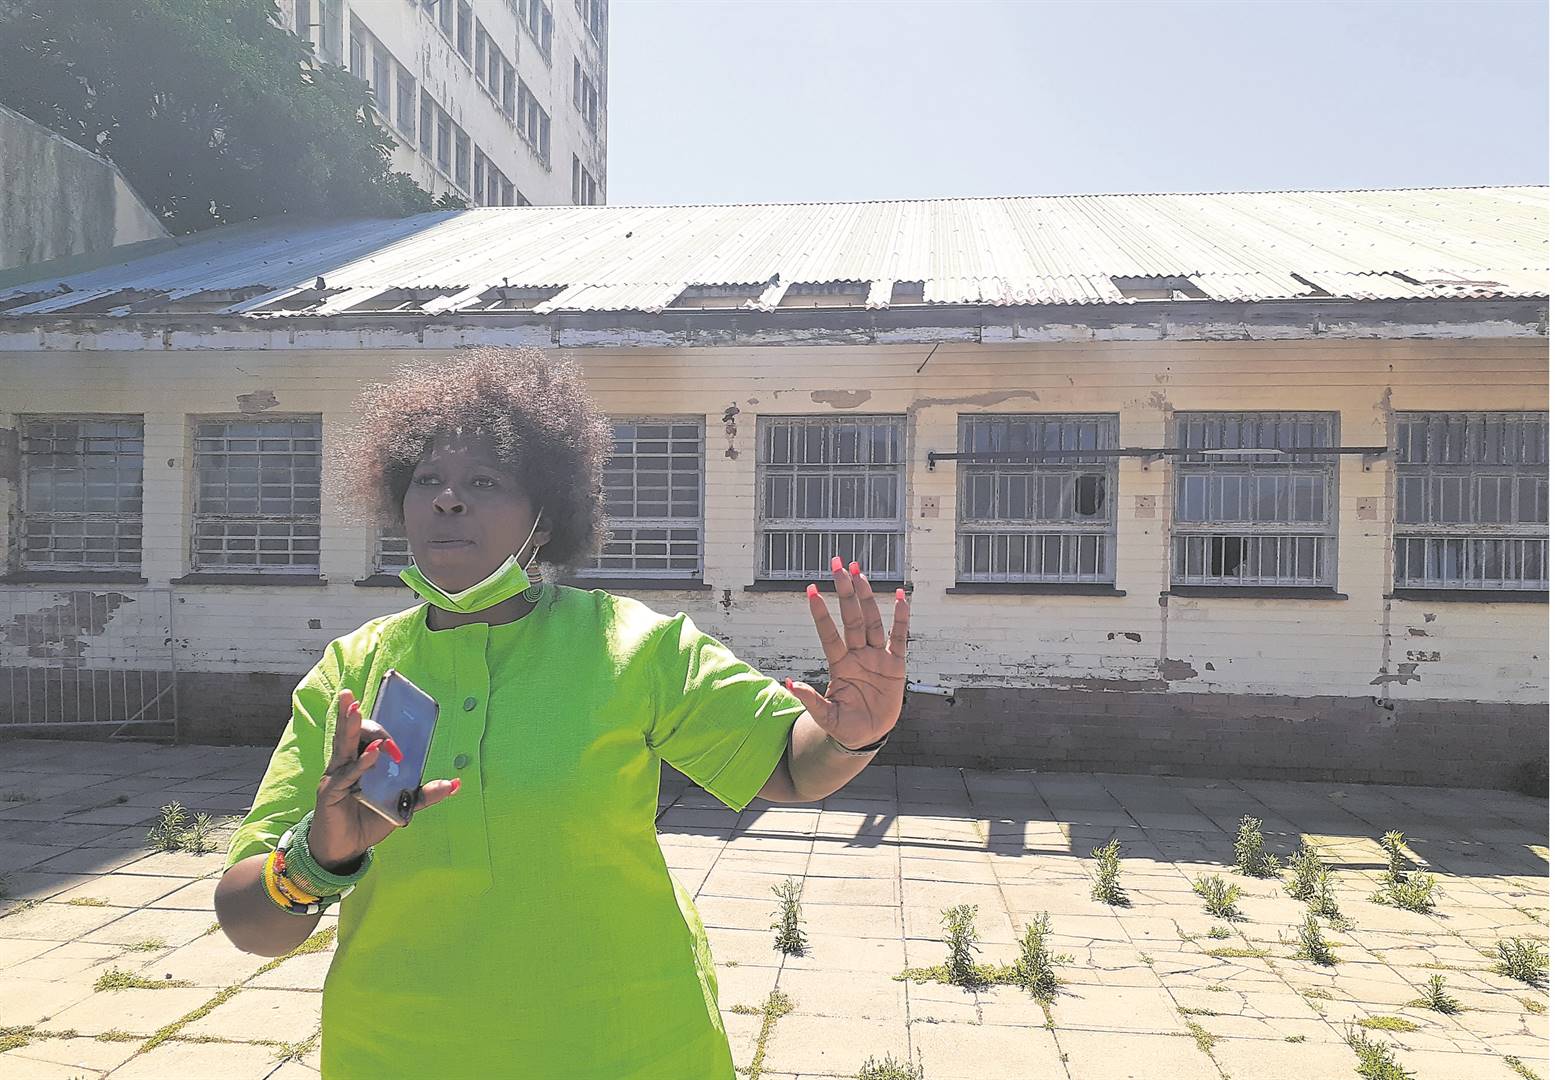 Dr Makhosi Khoza, at a dilapidated building in the Durban city centre.